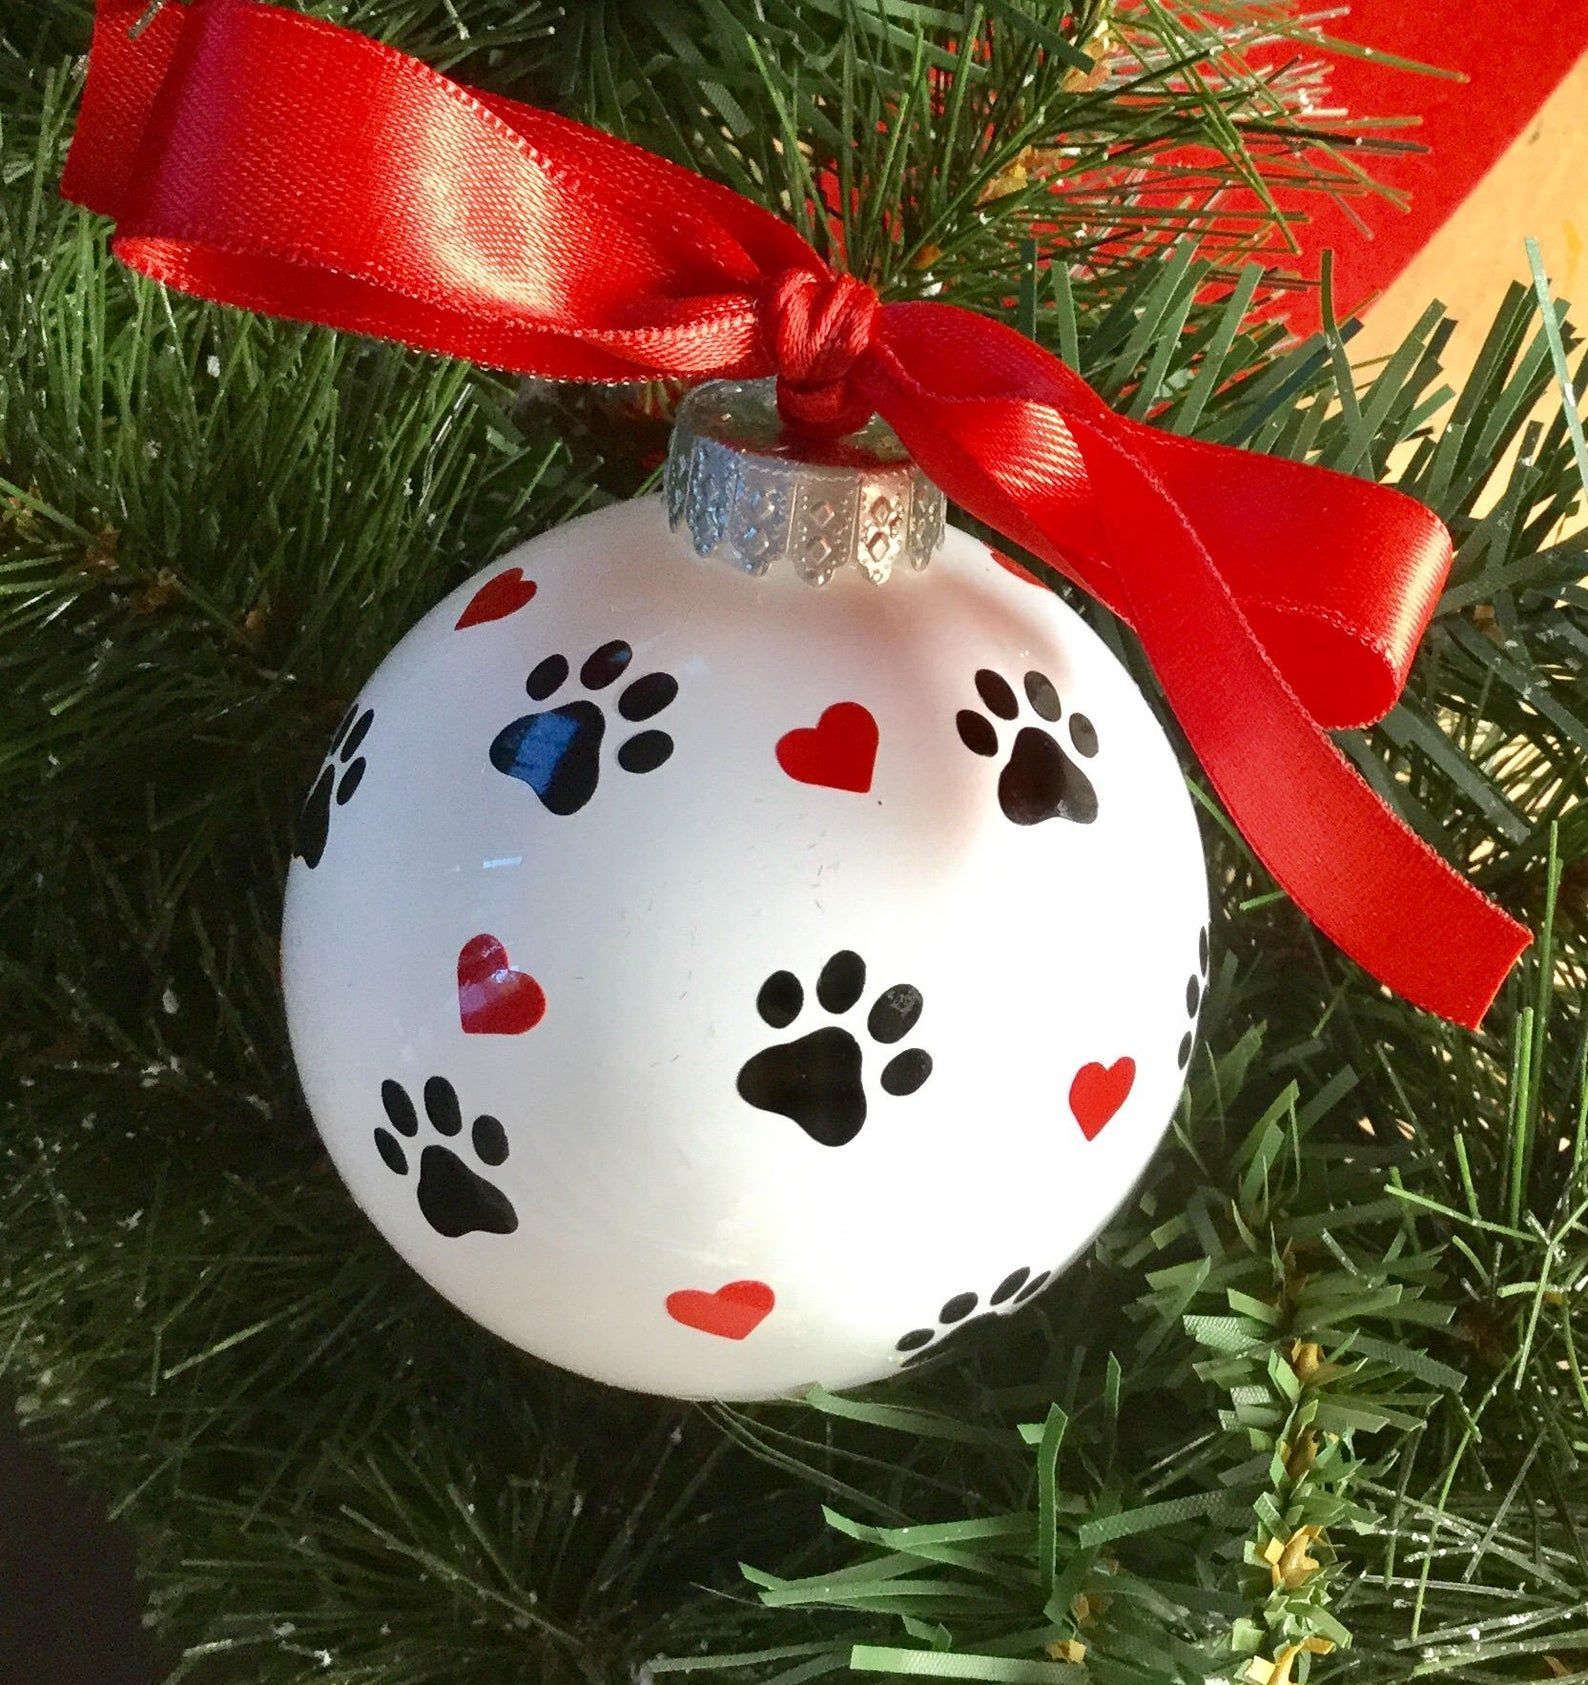 Dog Paw Print and Hearts Christmas Ornament - Personalized Dog Ornament -   17 xmas crafts to sell homemade gifts ideas